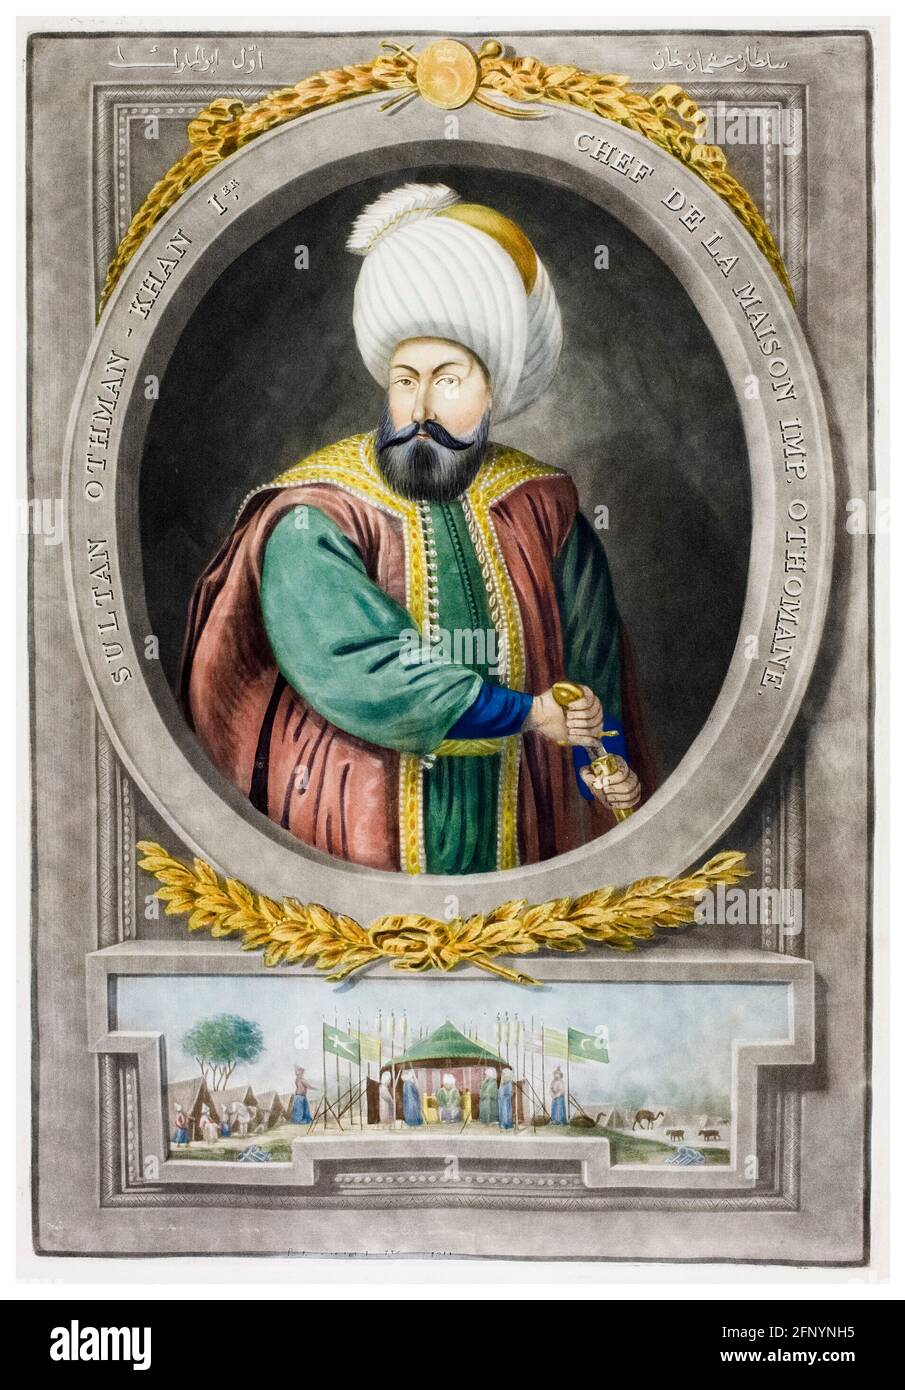 Osman I of Turkey (c.1254-c.1324), Founder and First Sultan of the Ottoman Empire (c.1299-c.1324), portrait engraving by John Young, 1815 Stock Photo